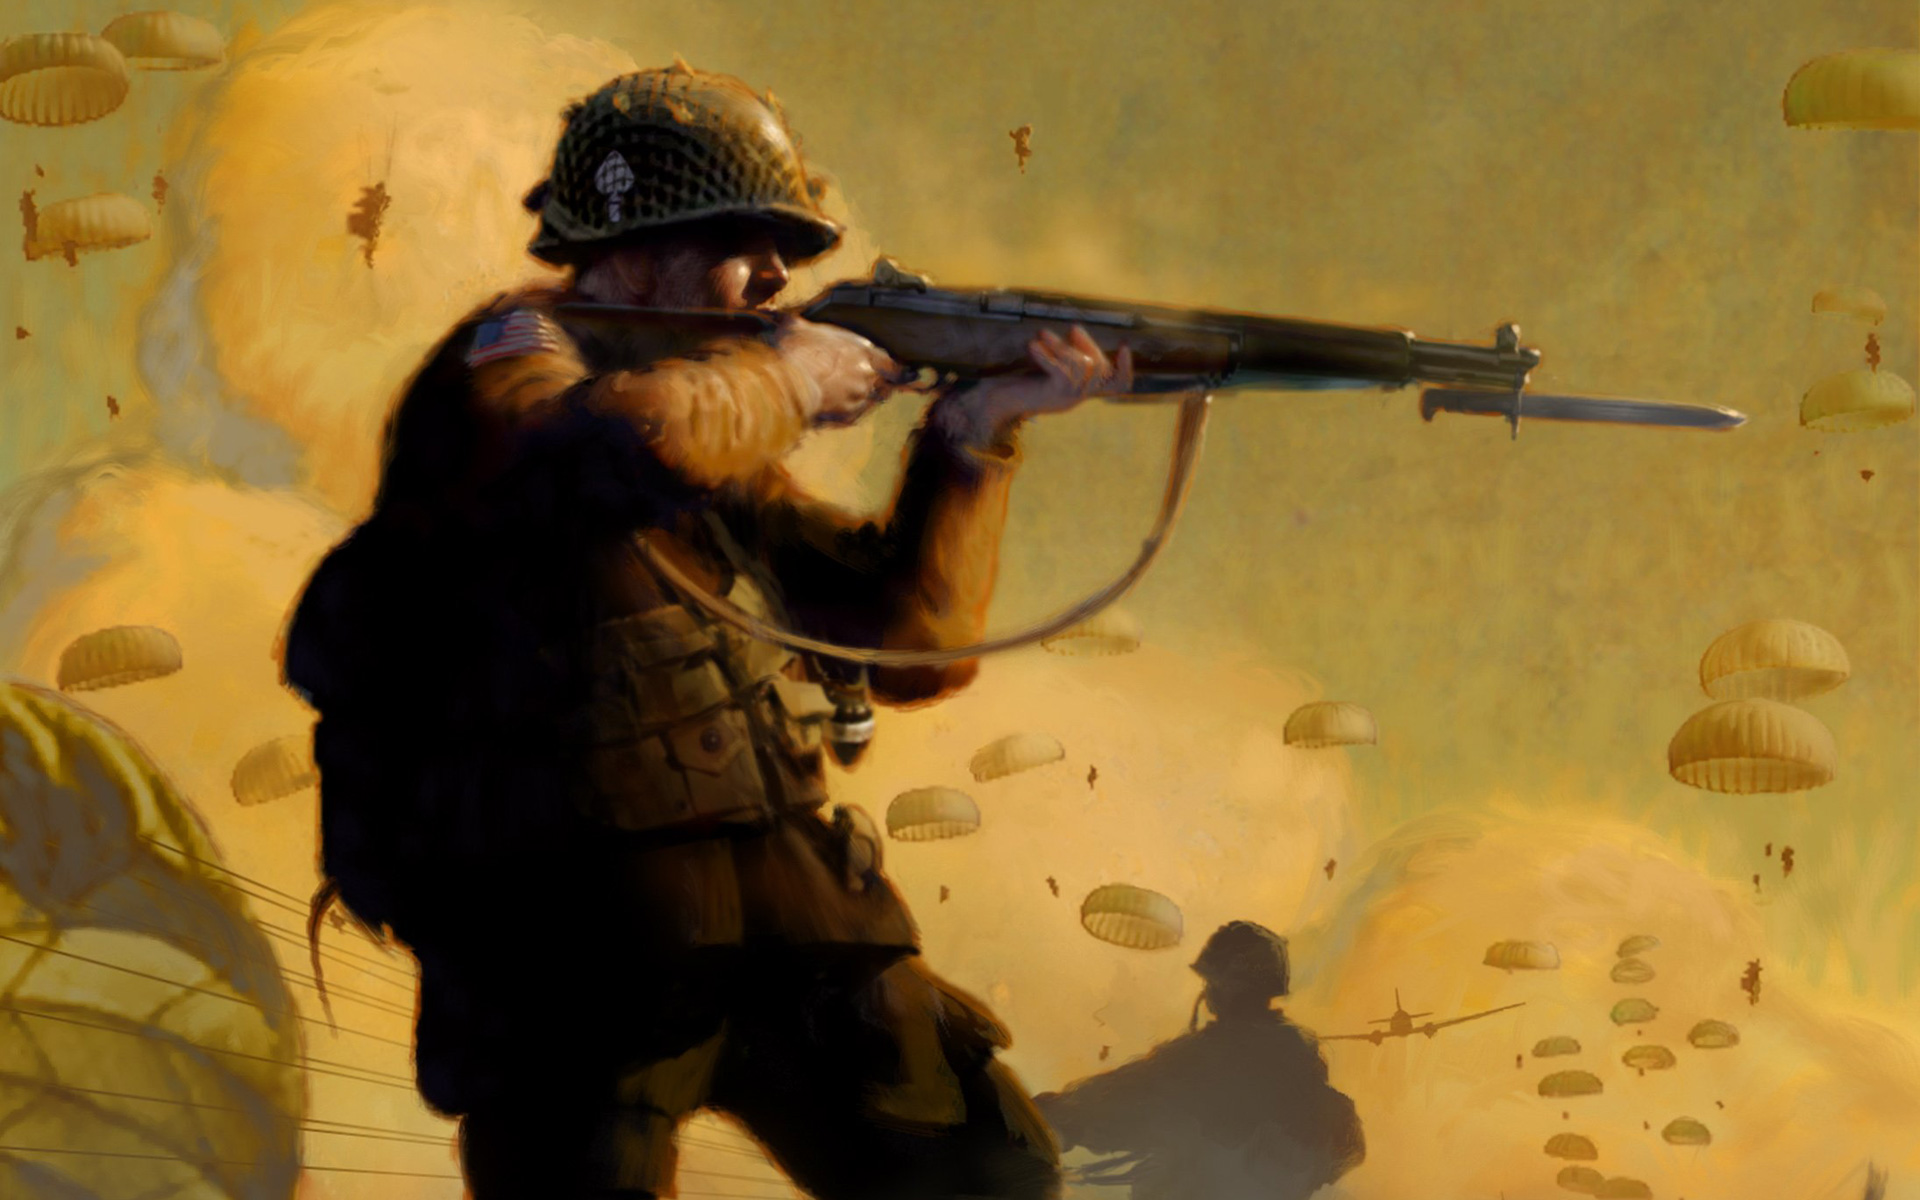 medal of honor frontline pc game free download